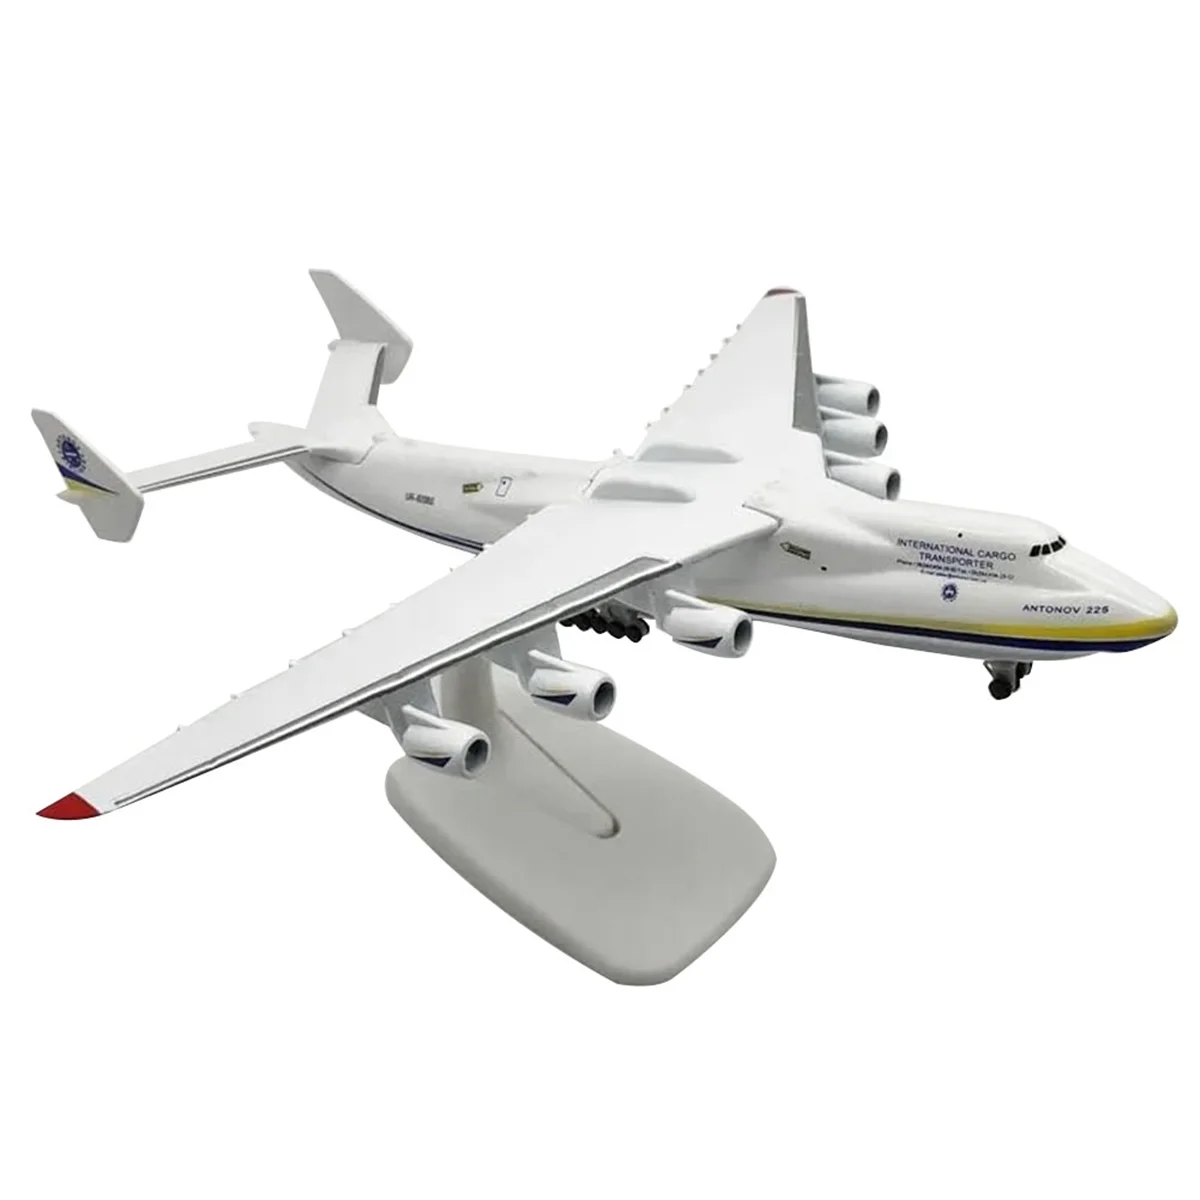 

Metal Alloy Antonov An-225 Mriya Airplane Model 1/400 Scale Replica Model Airplane Toy for Collection